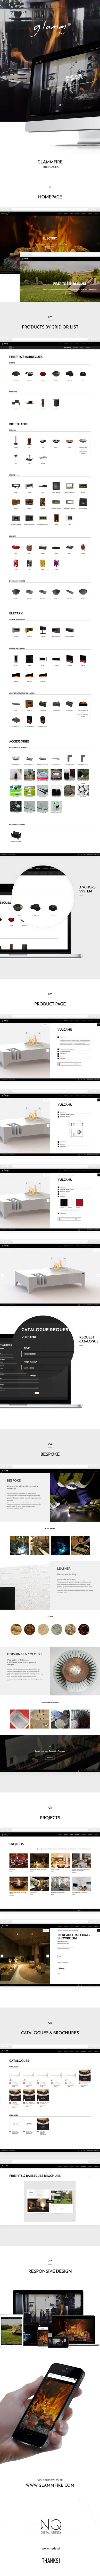 glammfire fireplaces firepits Barbecues bioethanol creative Layout clean simple Responsive responsivedesign NQDA digital digitalagency